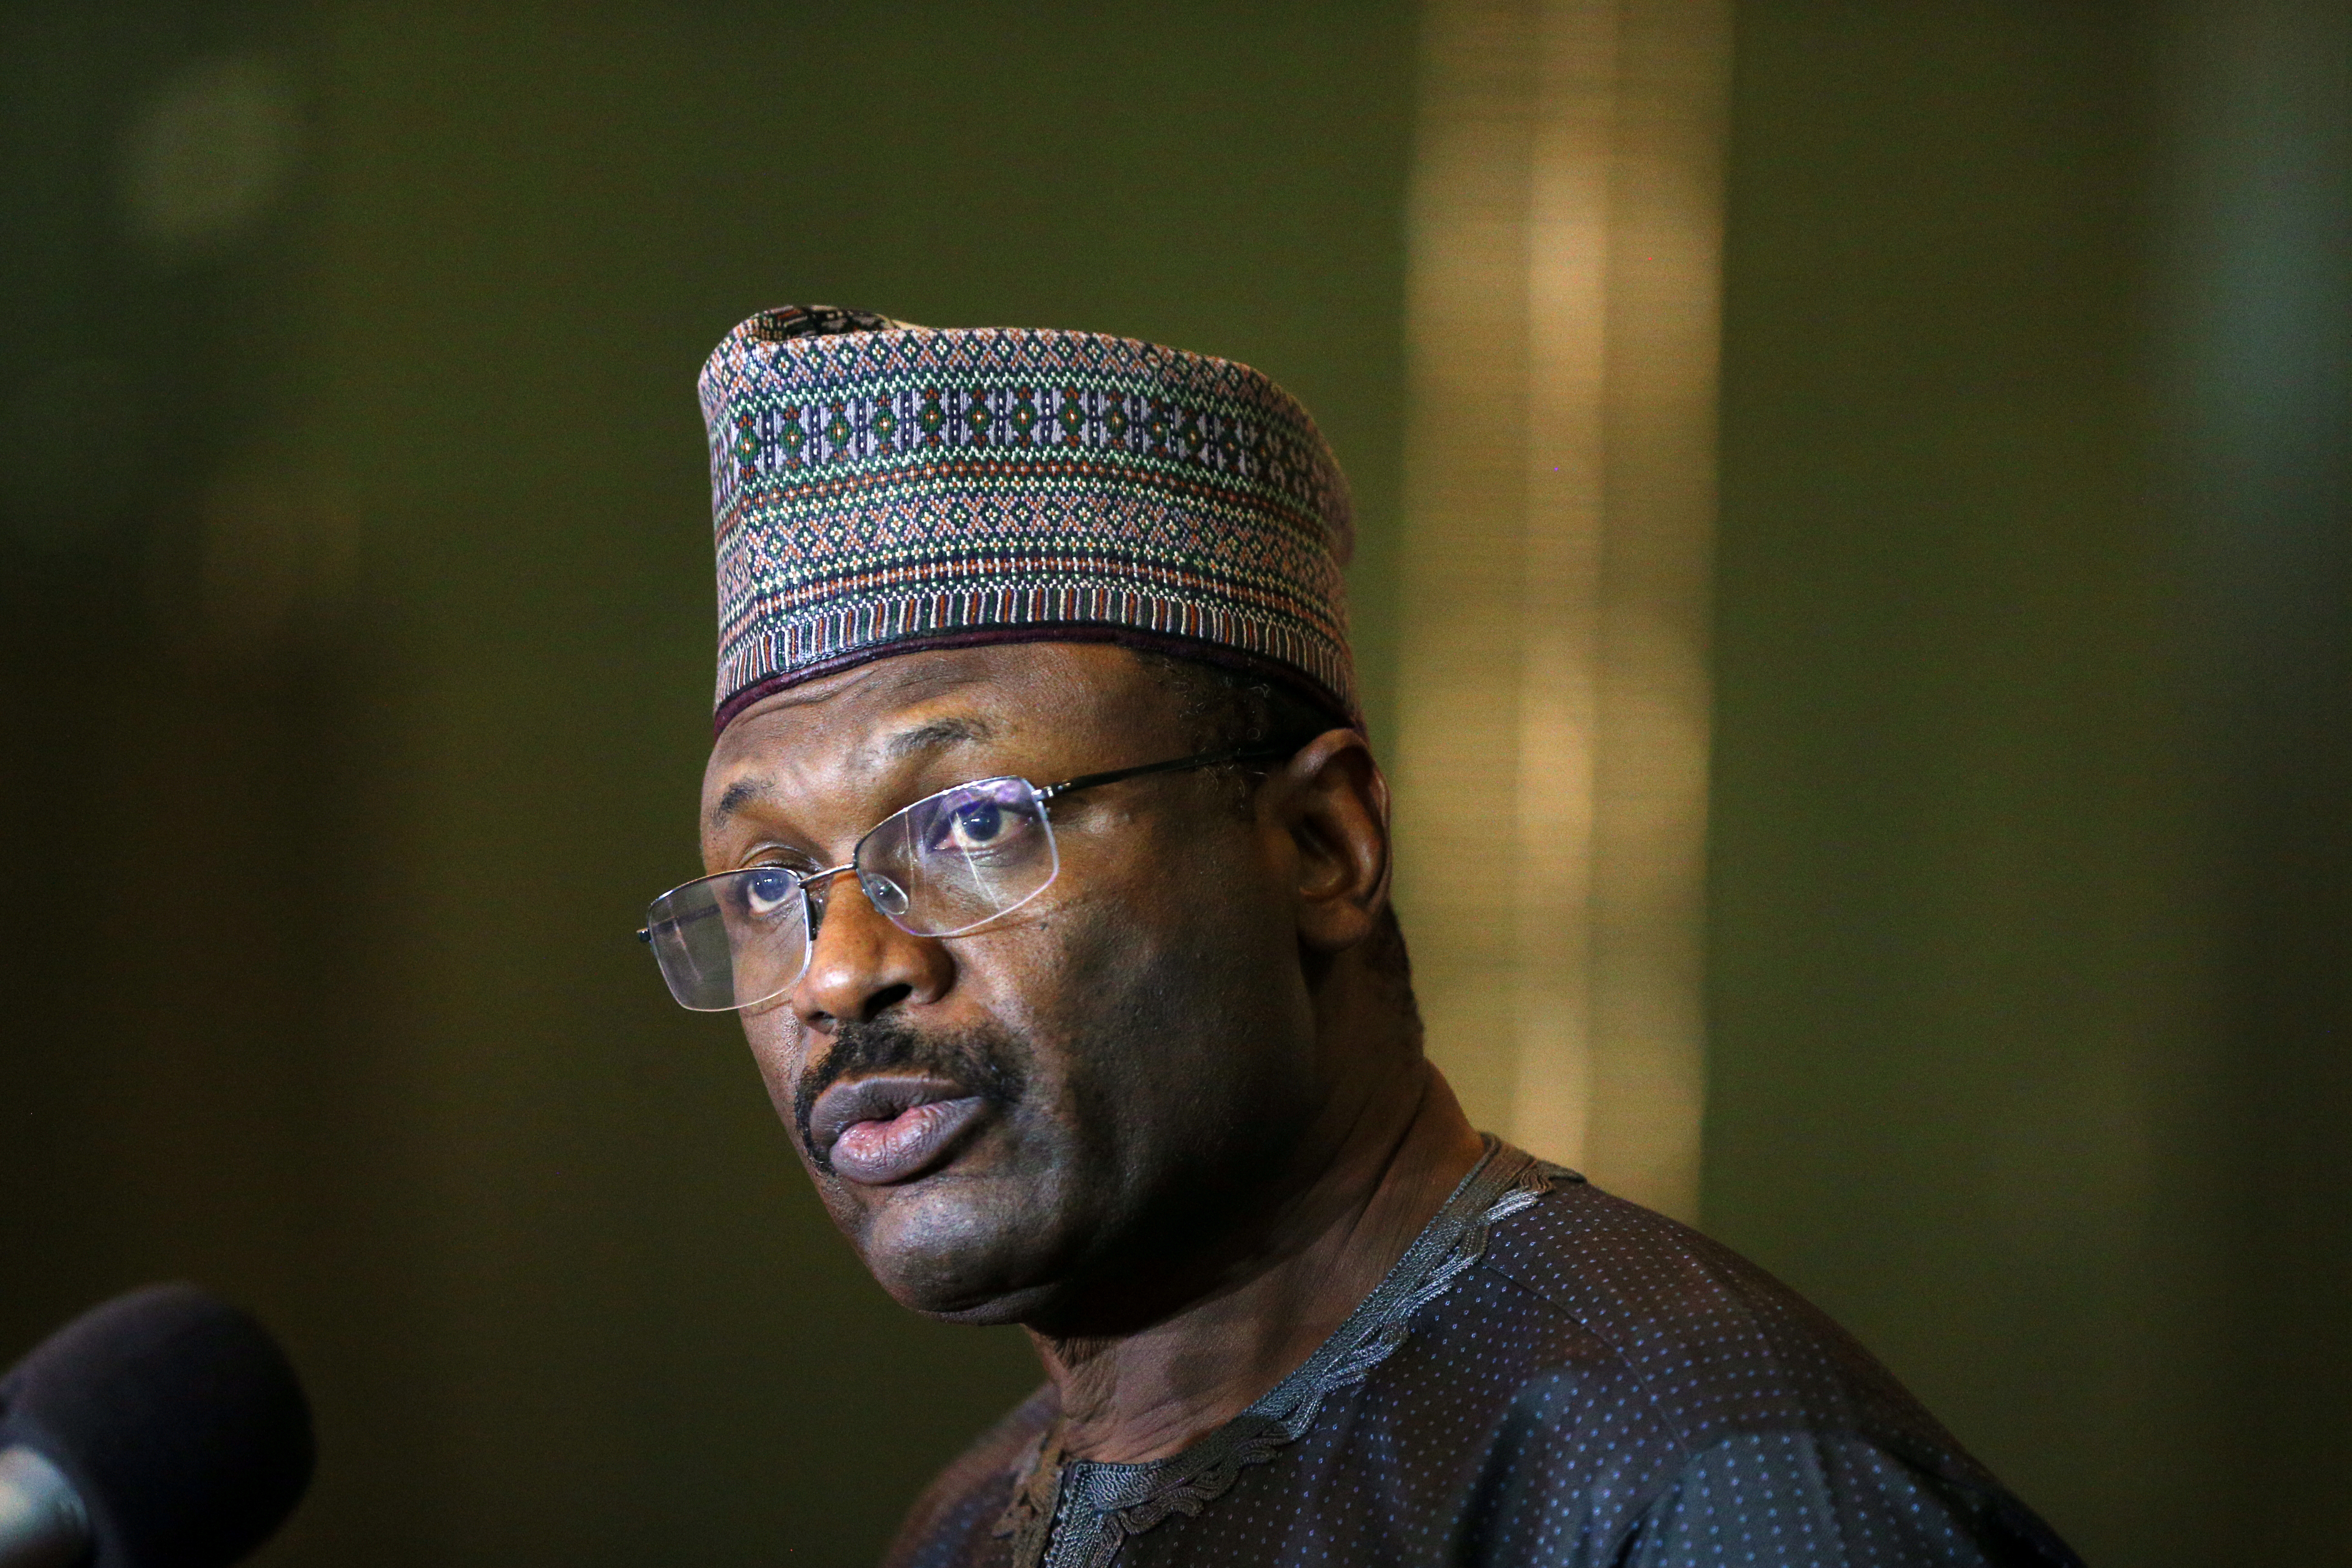 Mahmood Yakubu, Chairman of the Independent National Electoral Commission (INEC) addresses the media after the postponement of Nigeria's presidential election in Abuja